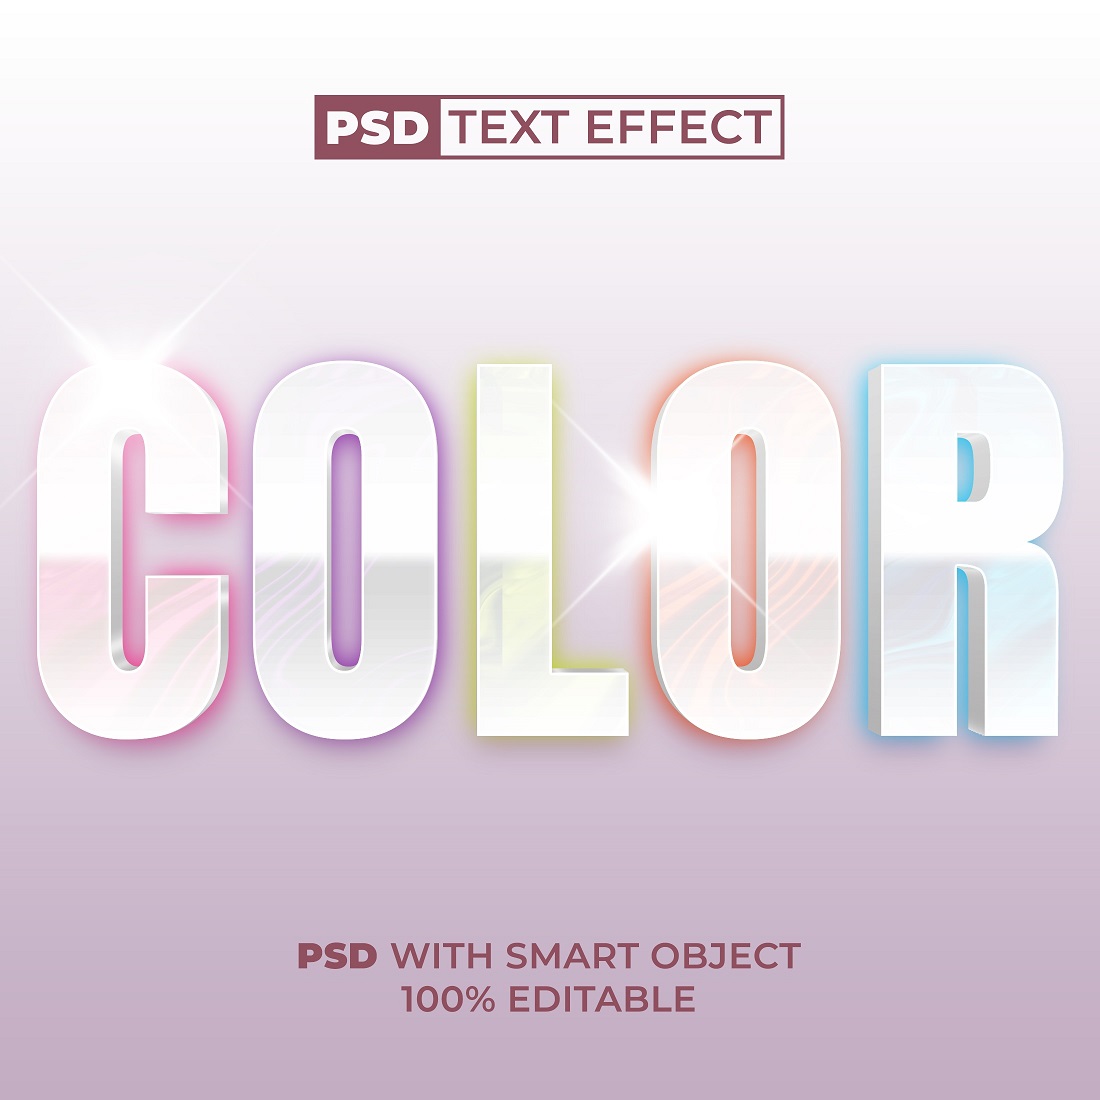 PSD 3D Color text effect colorful backlight cover image.